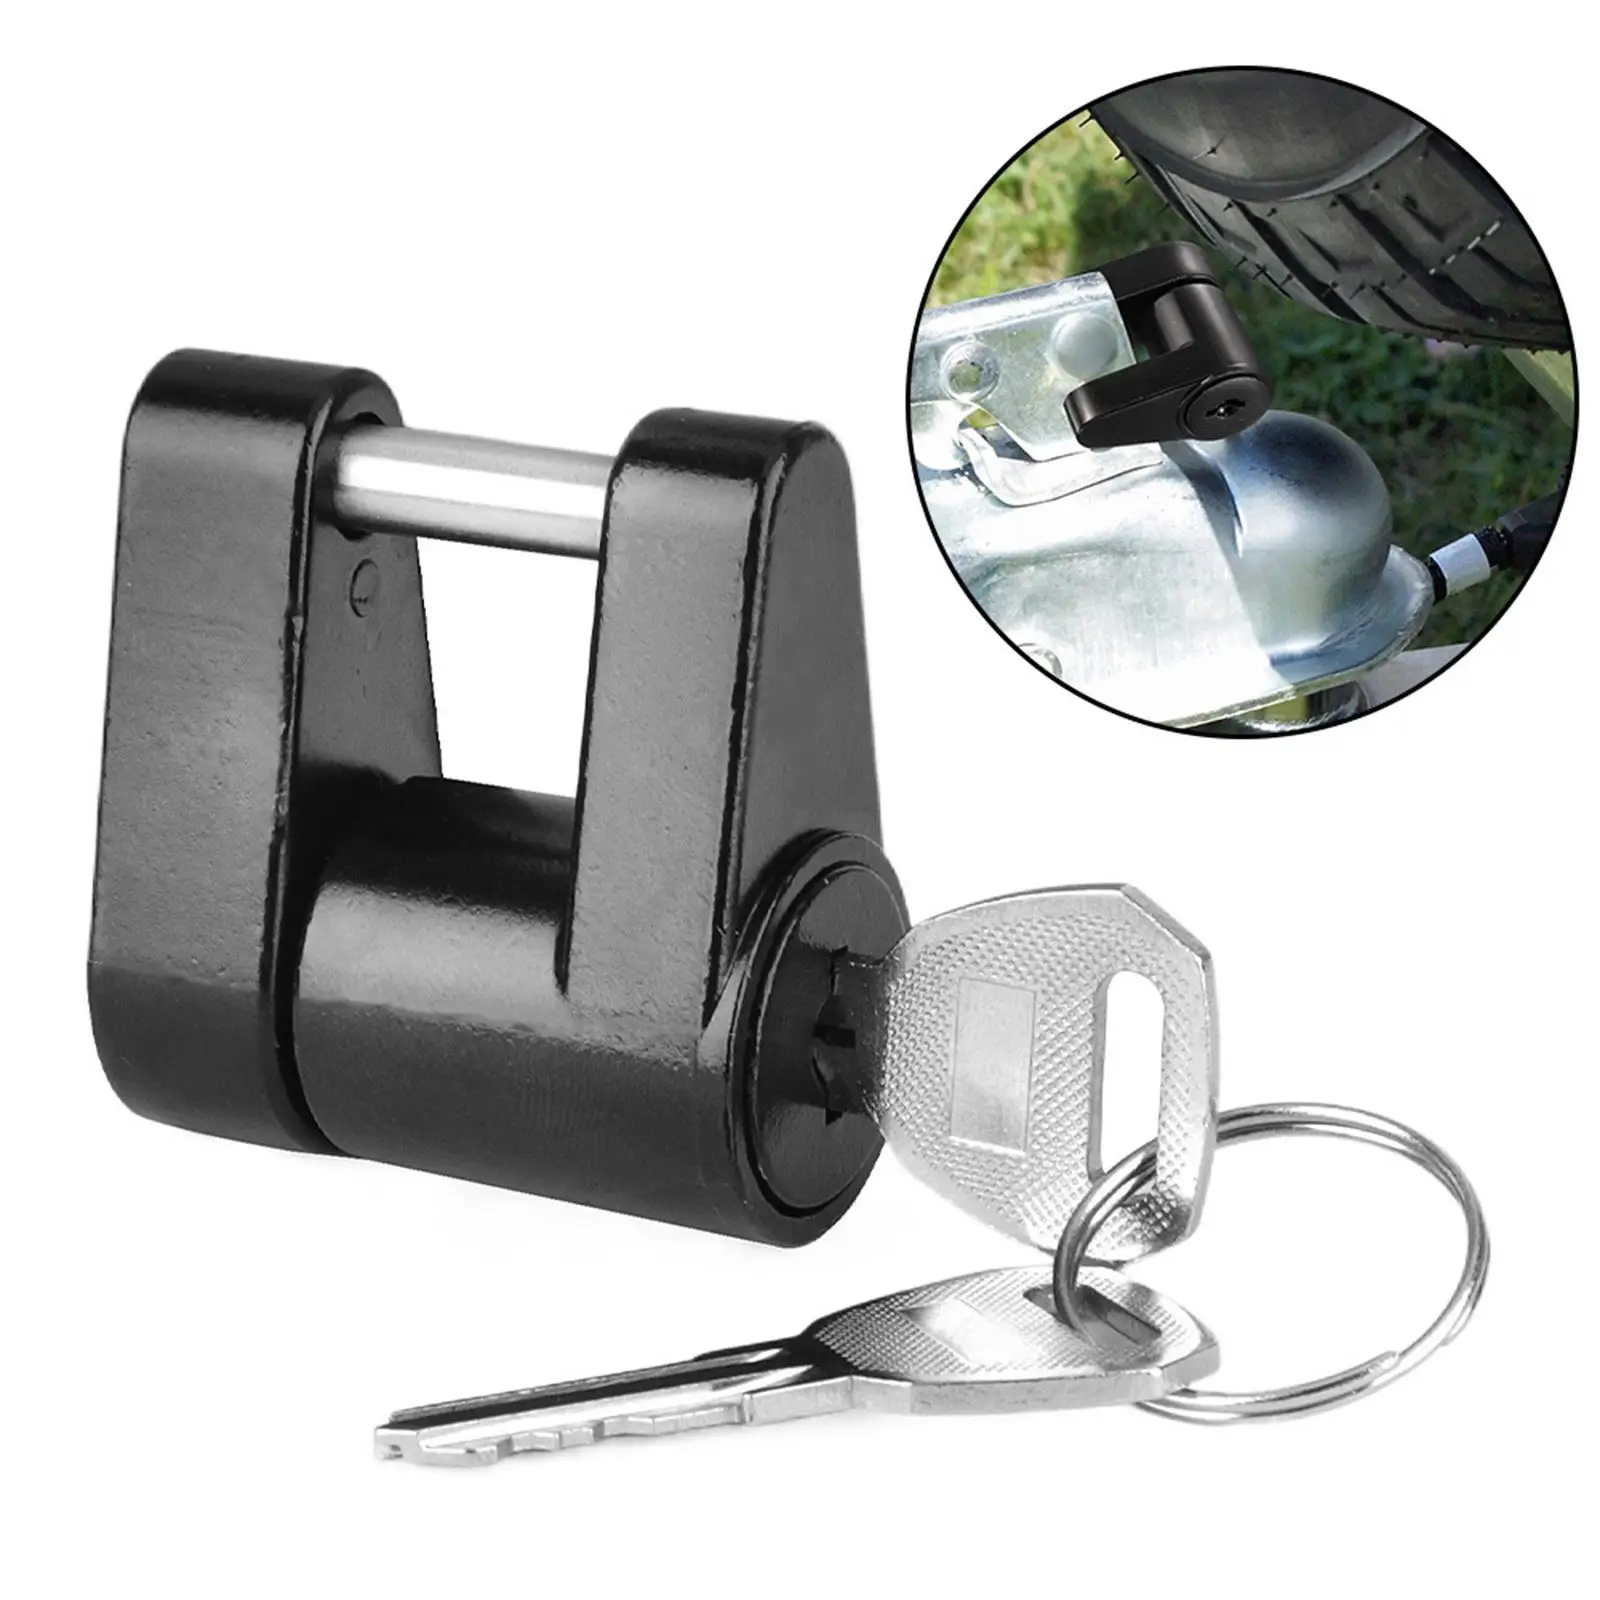 Trailer Coupler Lock with 2 Keys 3/4 inch Span Black for Car`S Coupler Tow Boat Campers Construction Vehicles Trailers